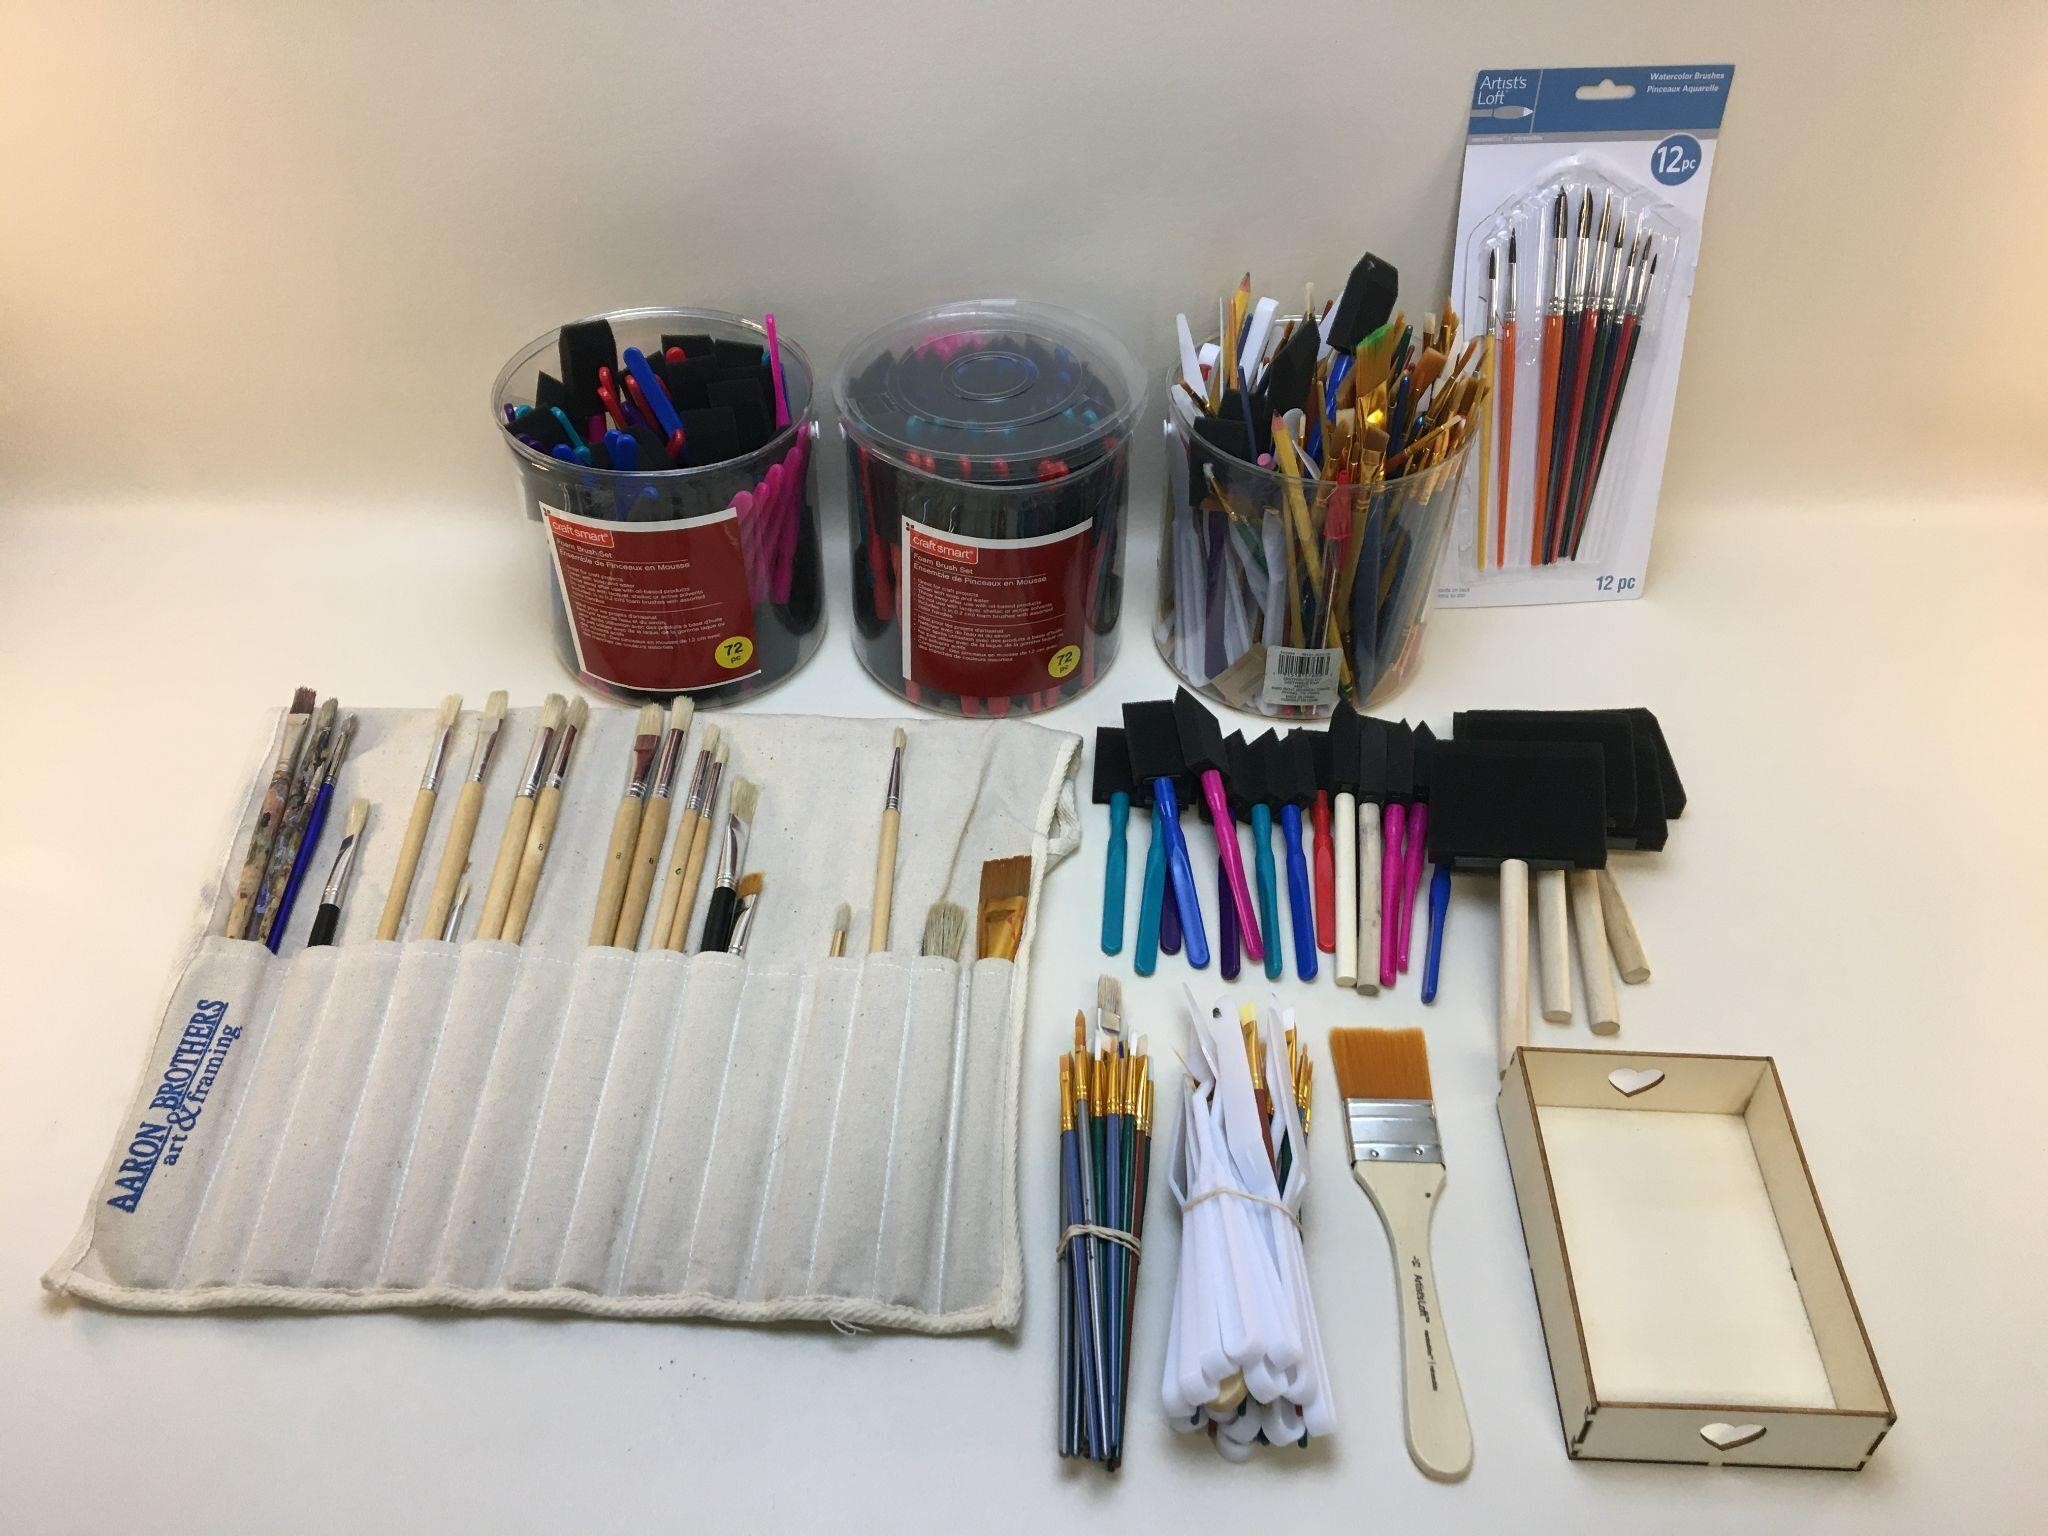 Used Paint Brushes & Supplies